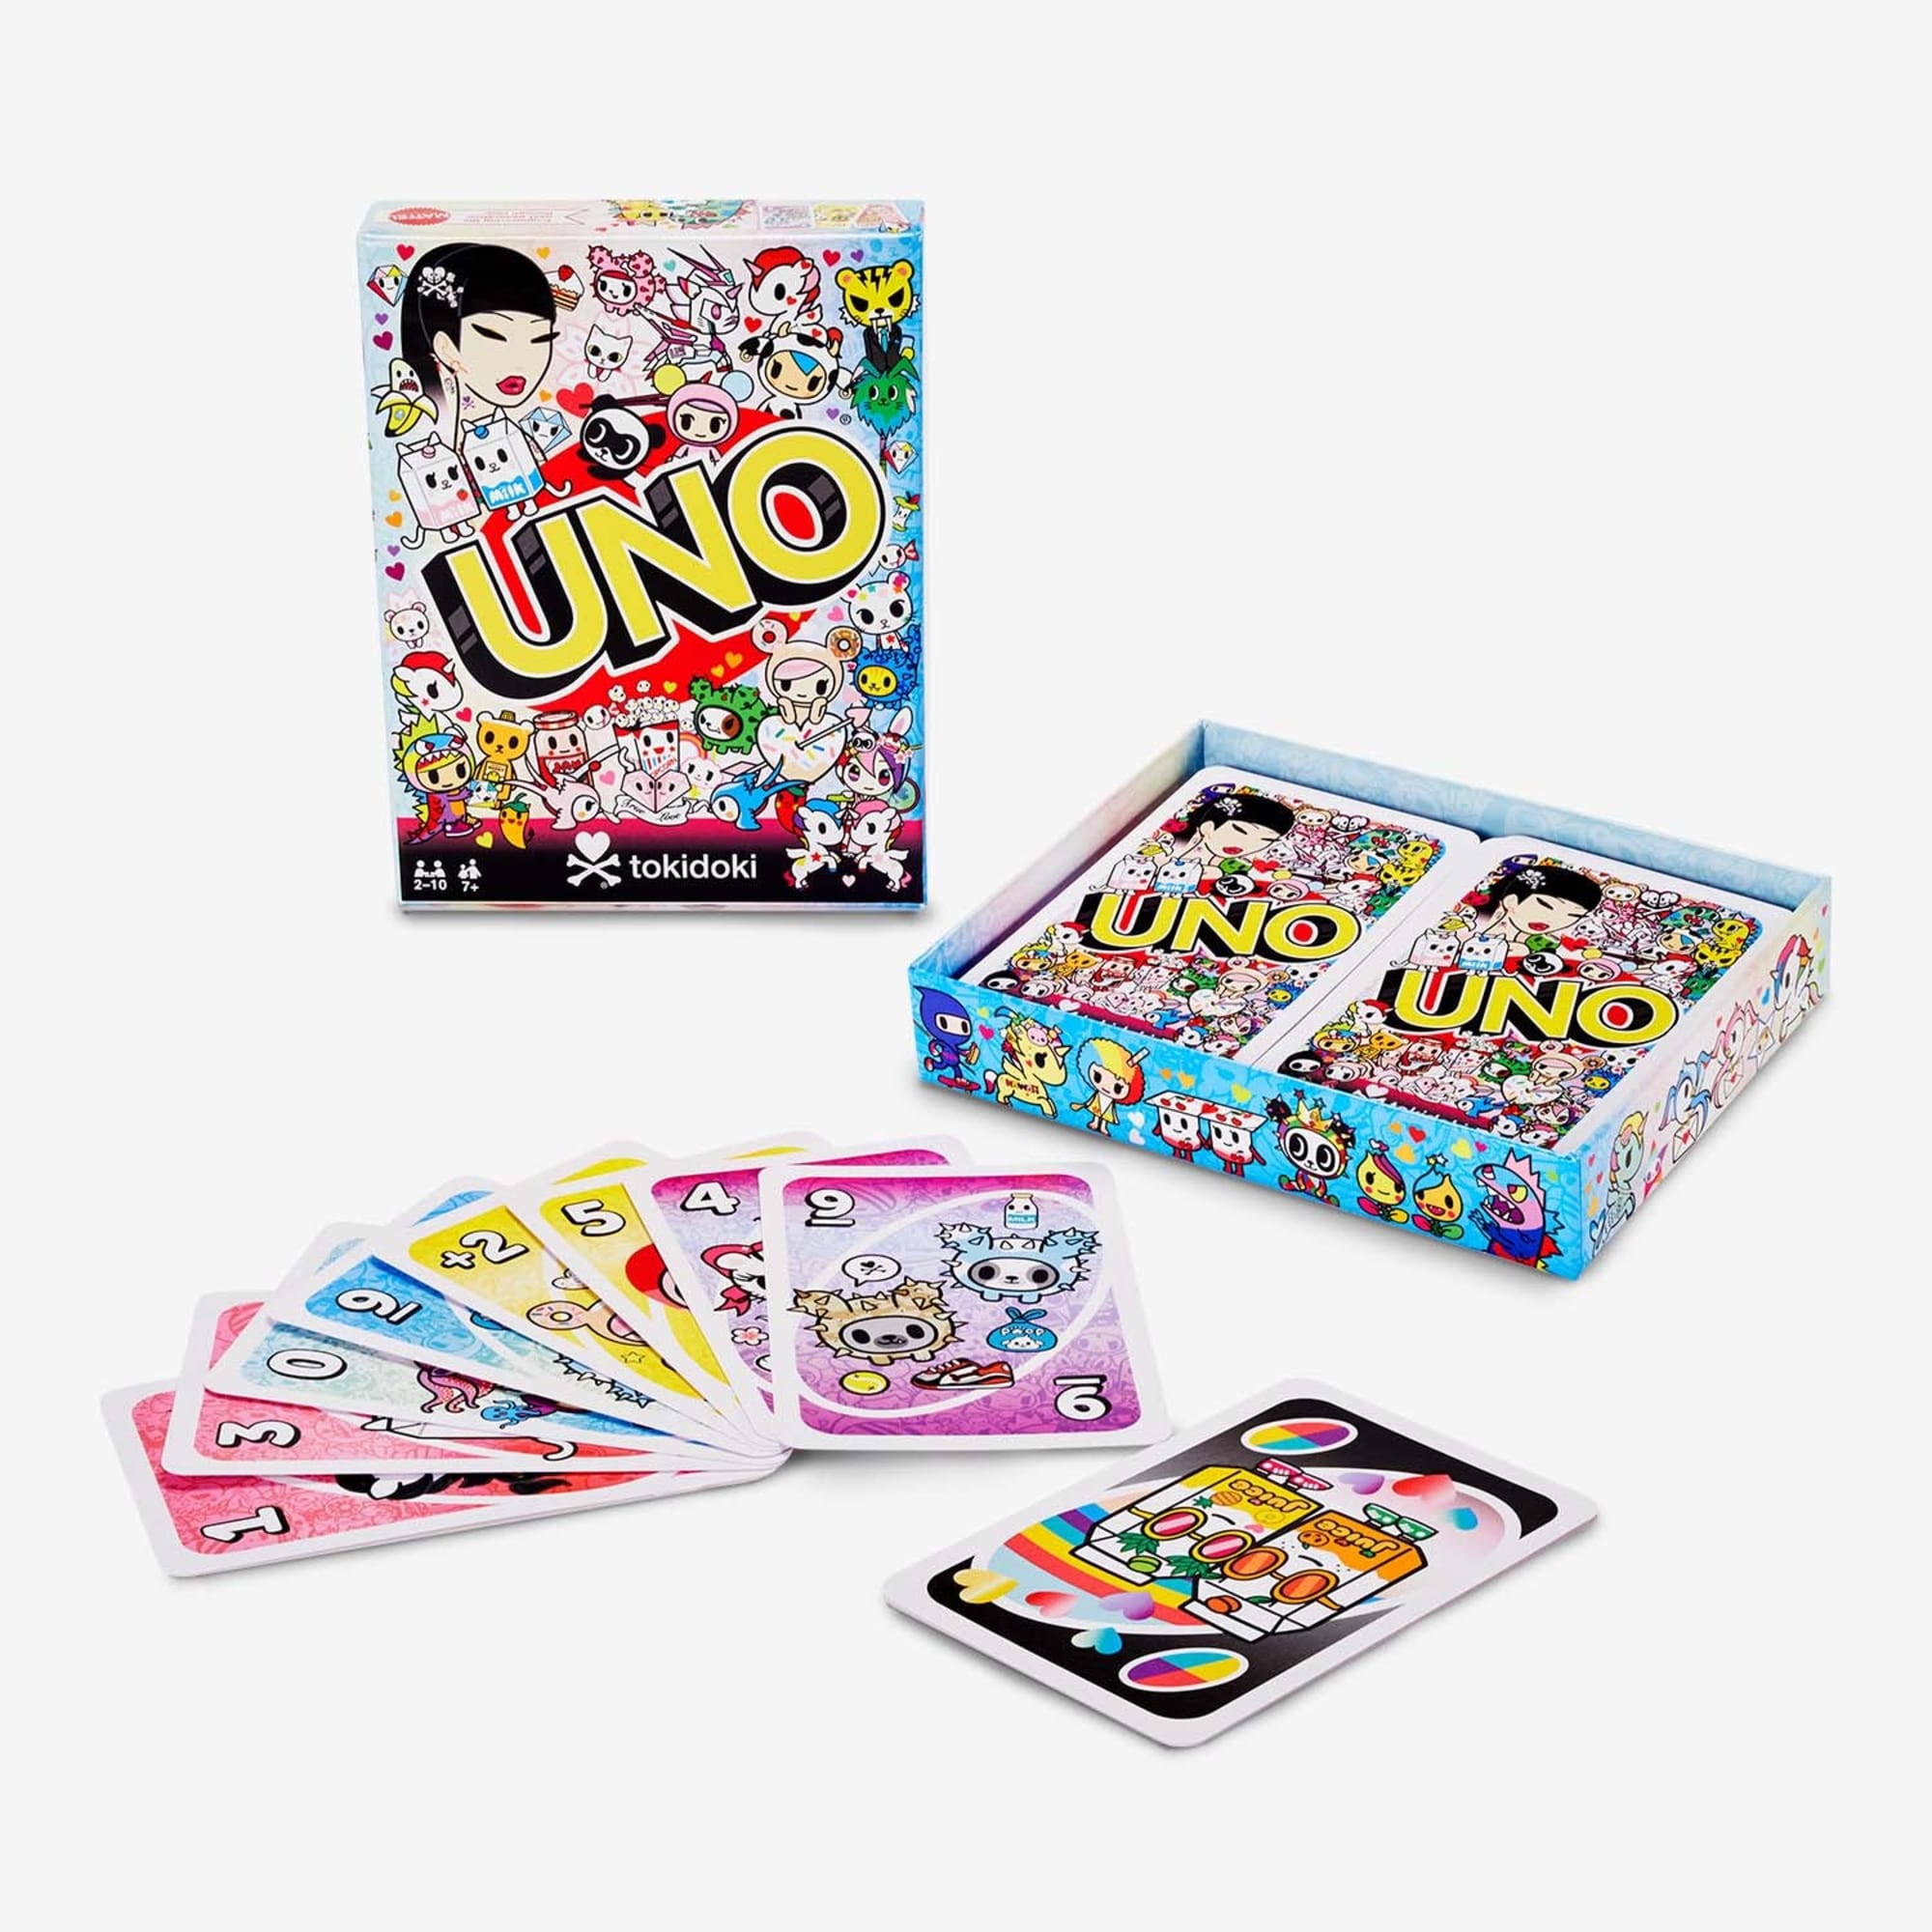 UNO - Introducing the newest release in the UNO Artiste Series